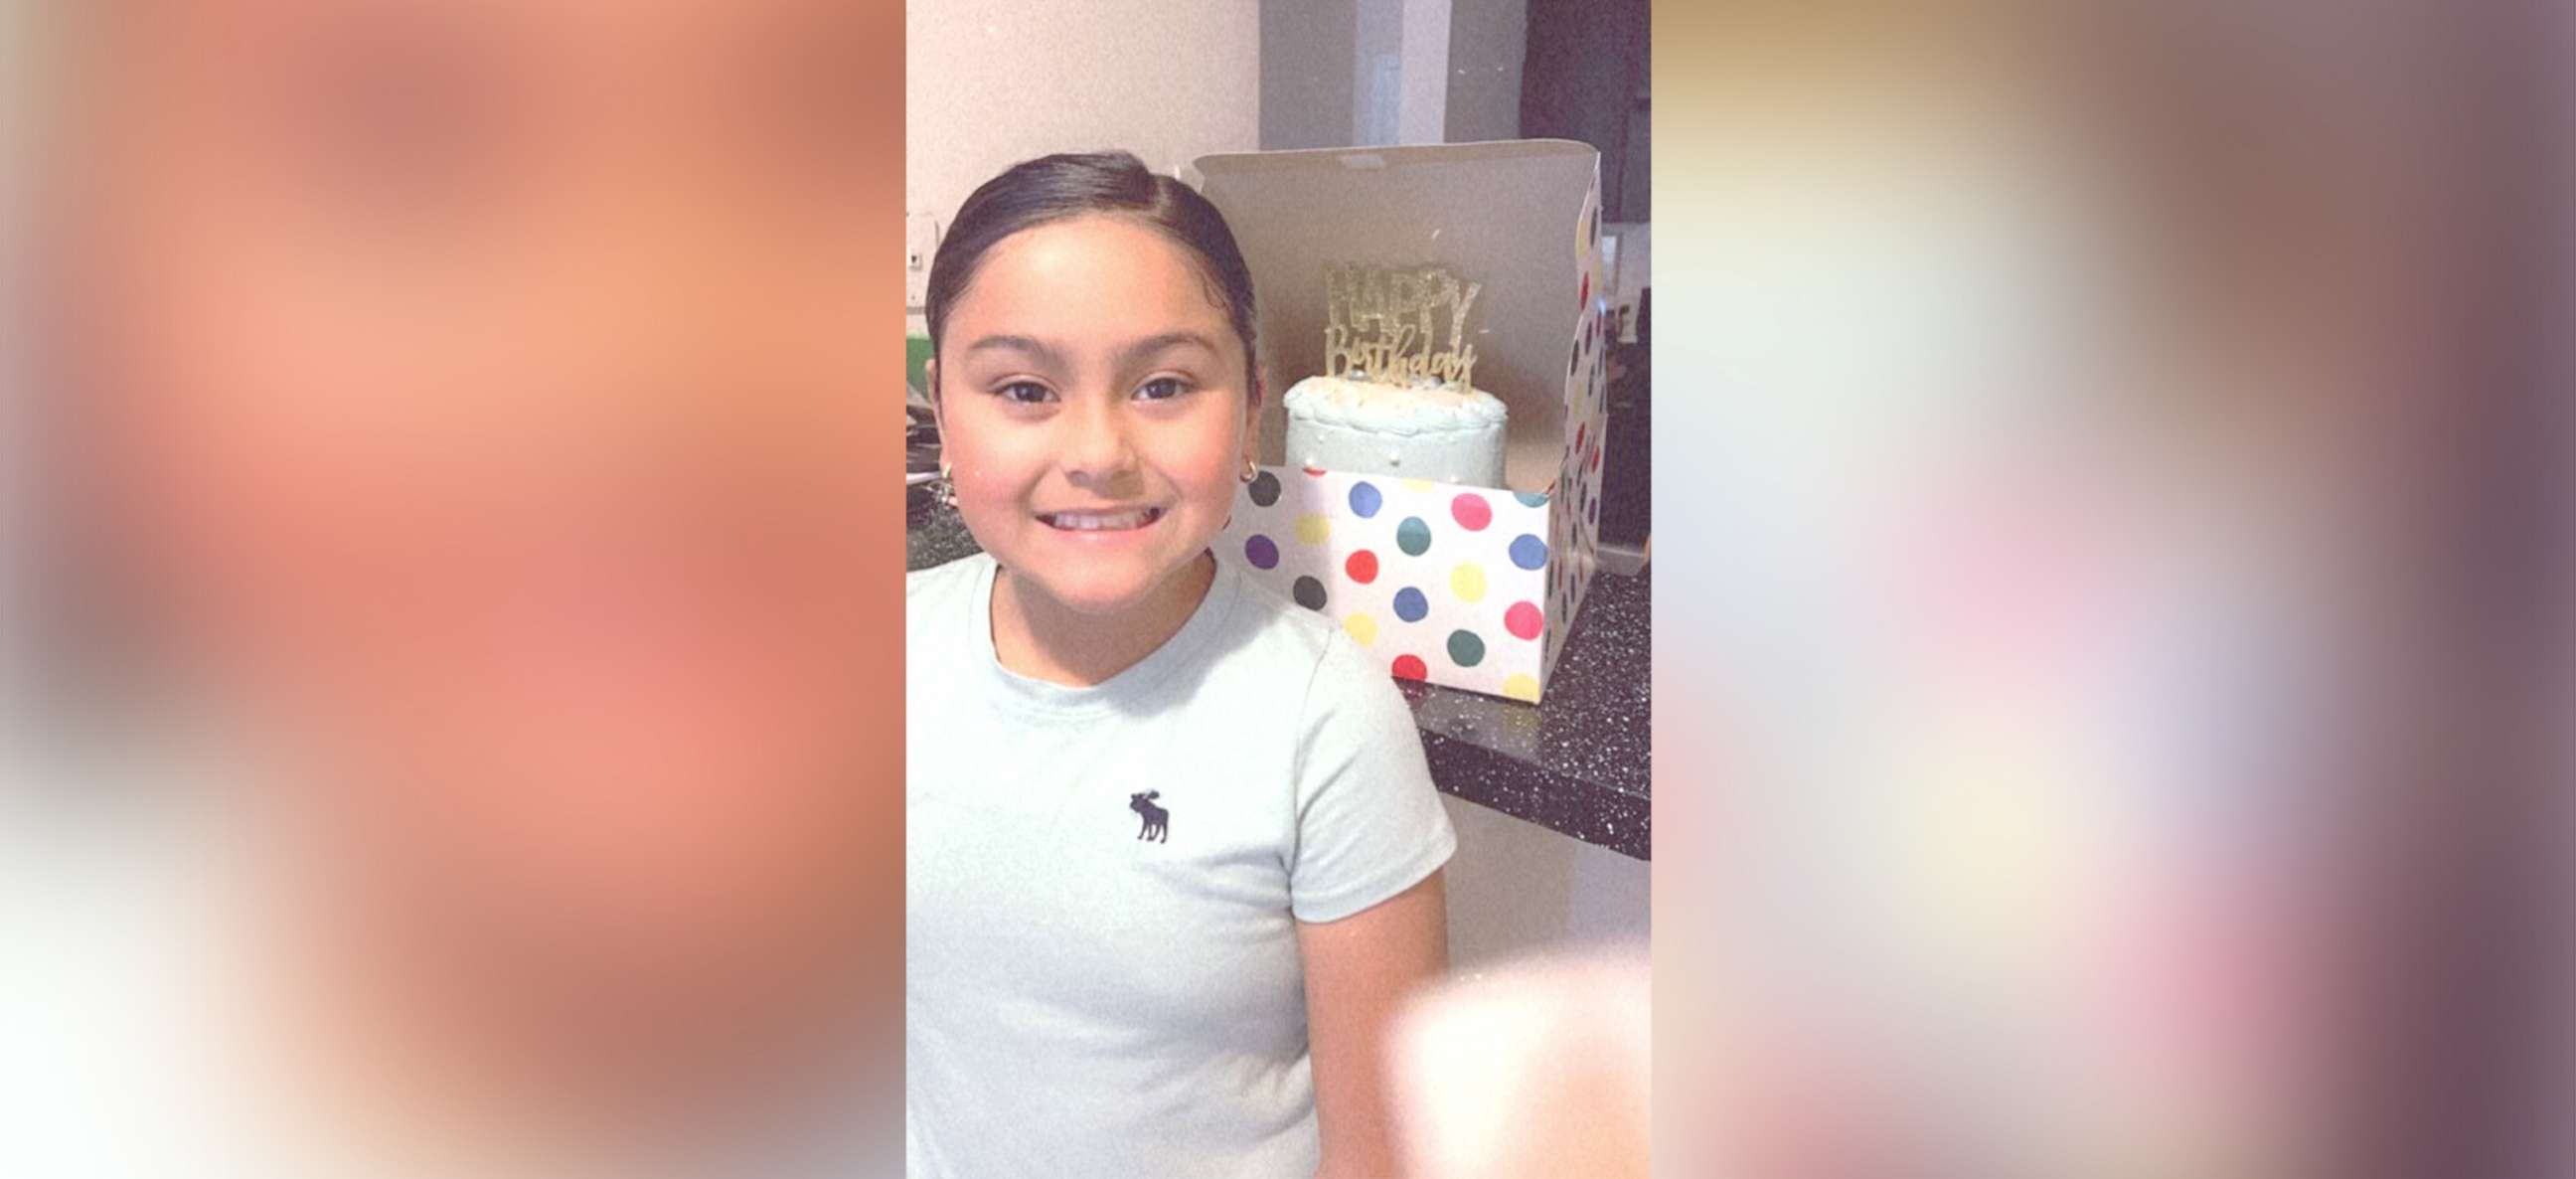 PHOTO: Amerie Jo Garza, one of the victims in the Robb Elementary school shootings in Uvalde, Texas, is seen in an undated family photo.